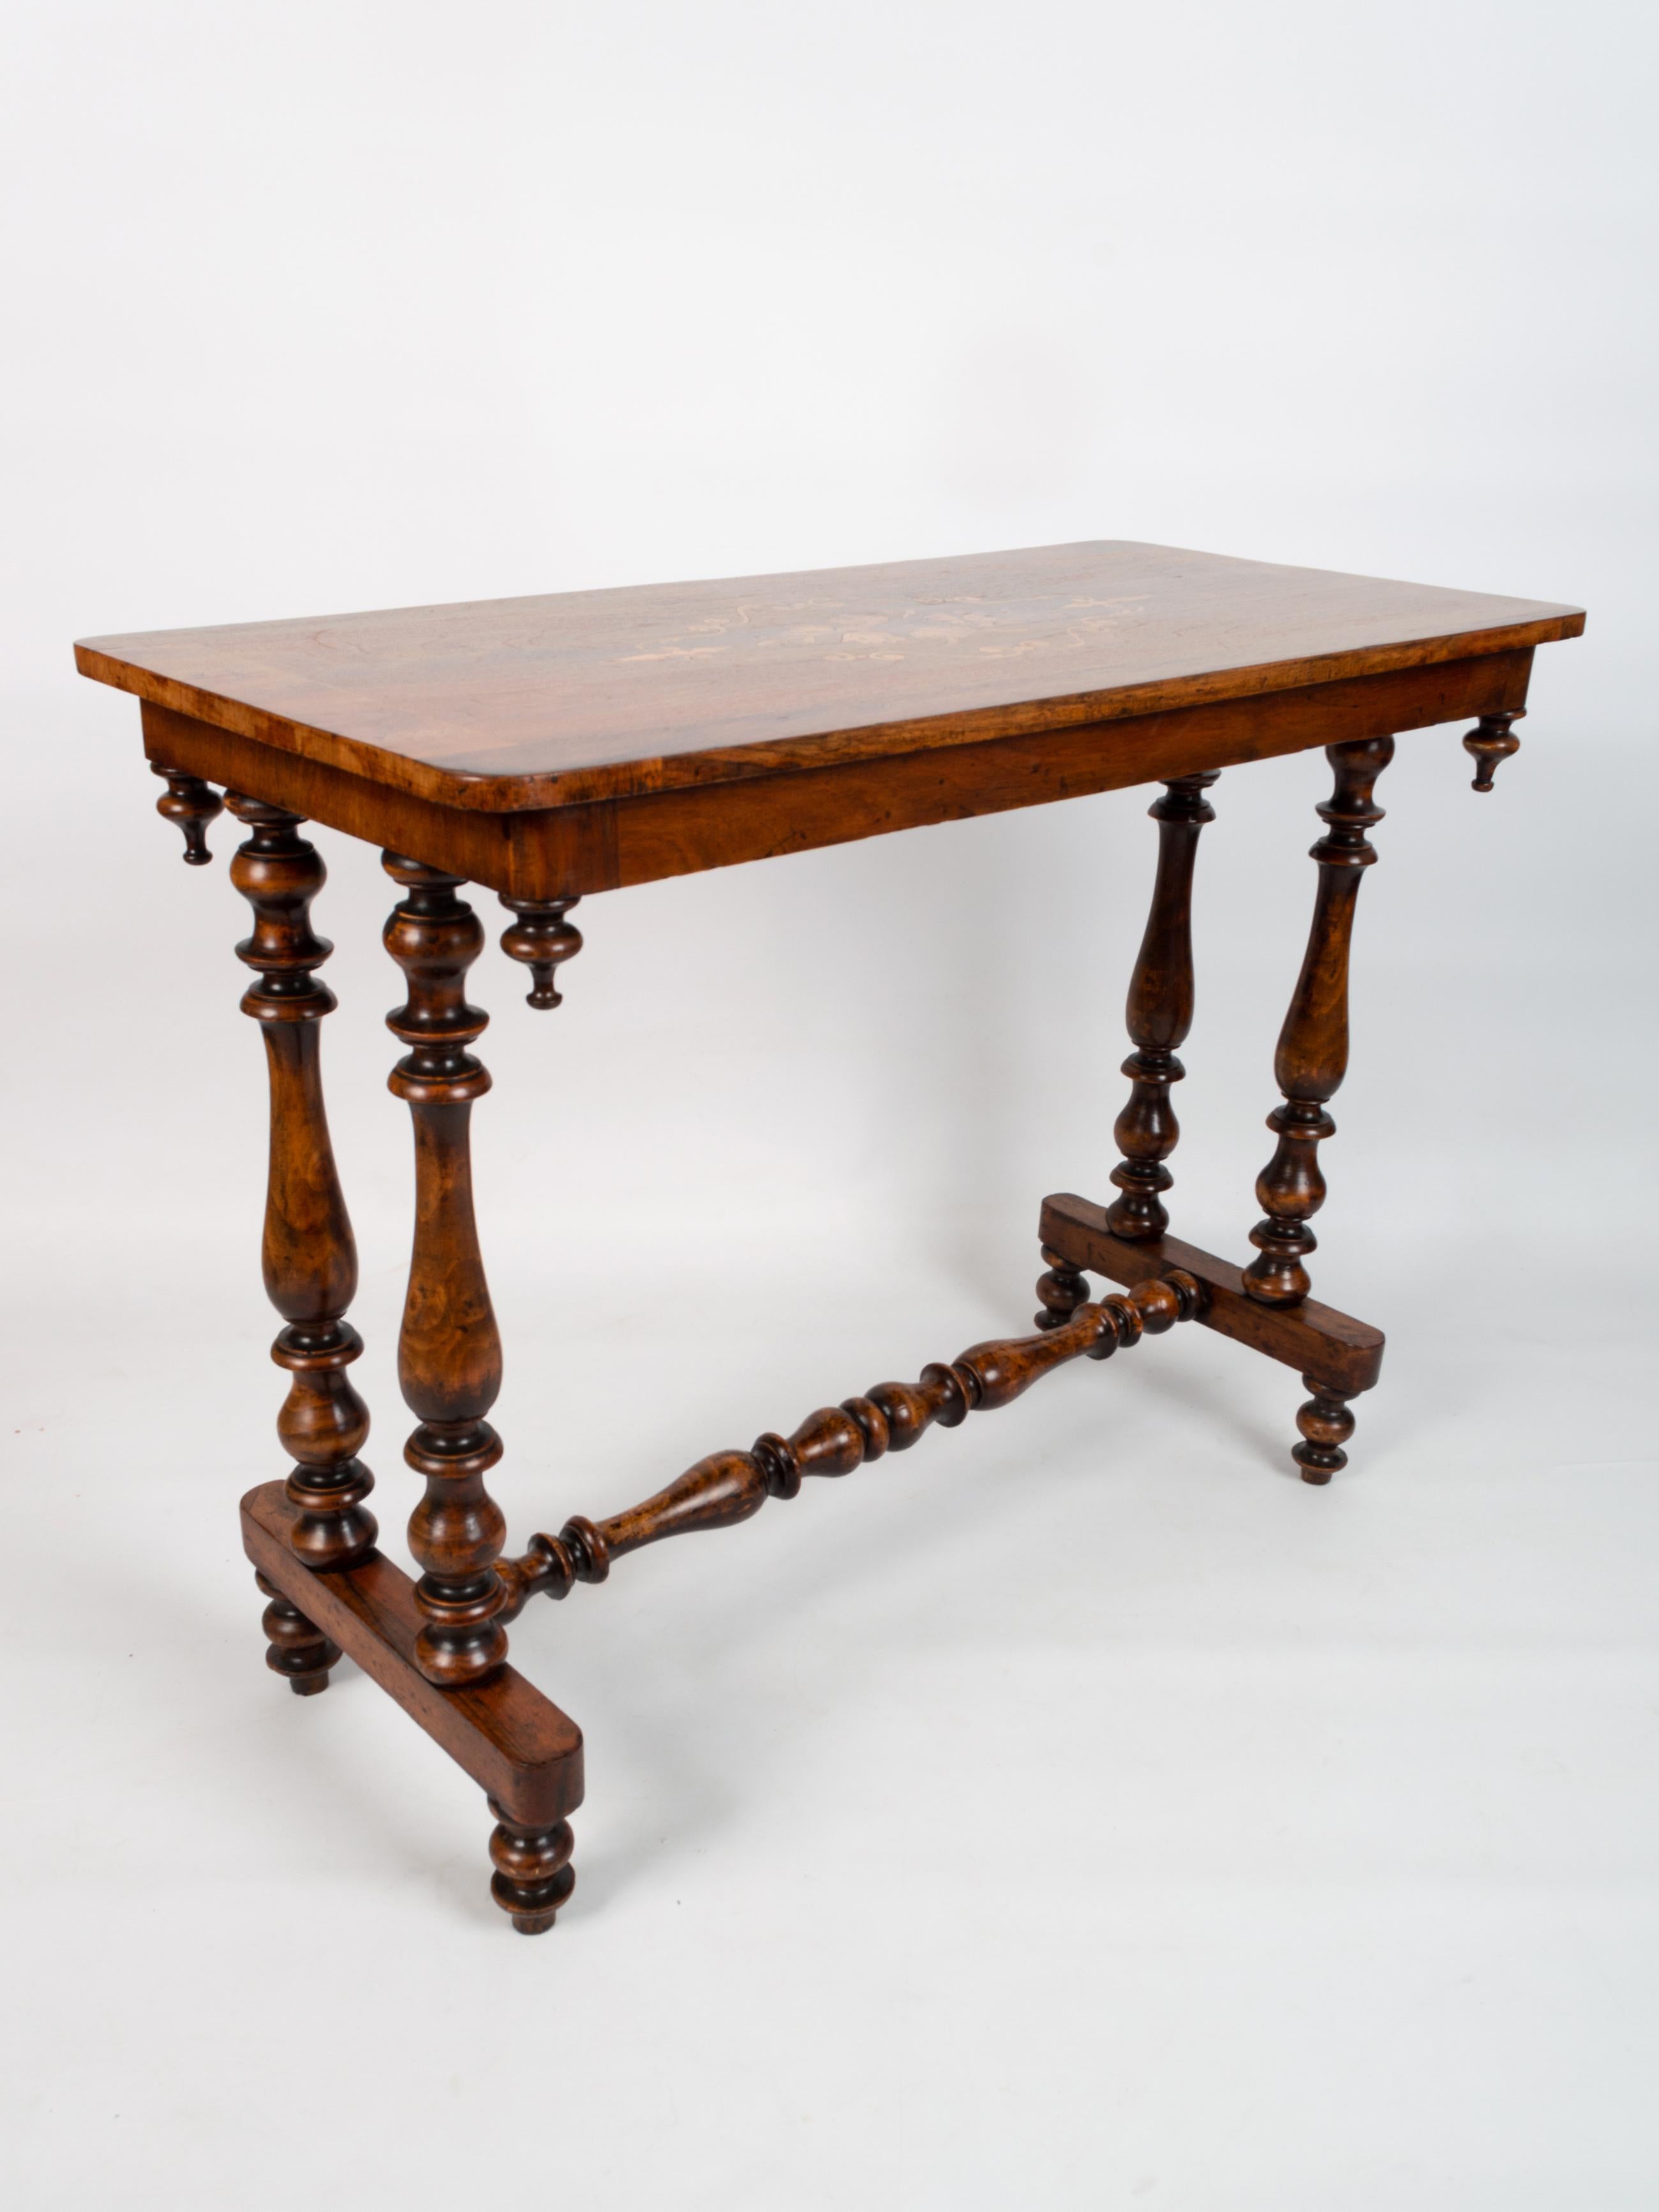 Antique English Edwardian Inlaid Walnut Hall Table Console C.1900 For Sale 5